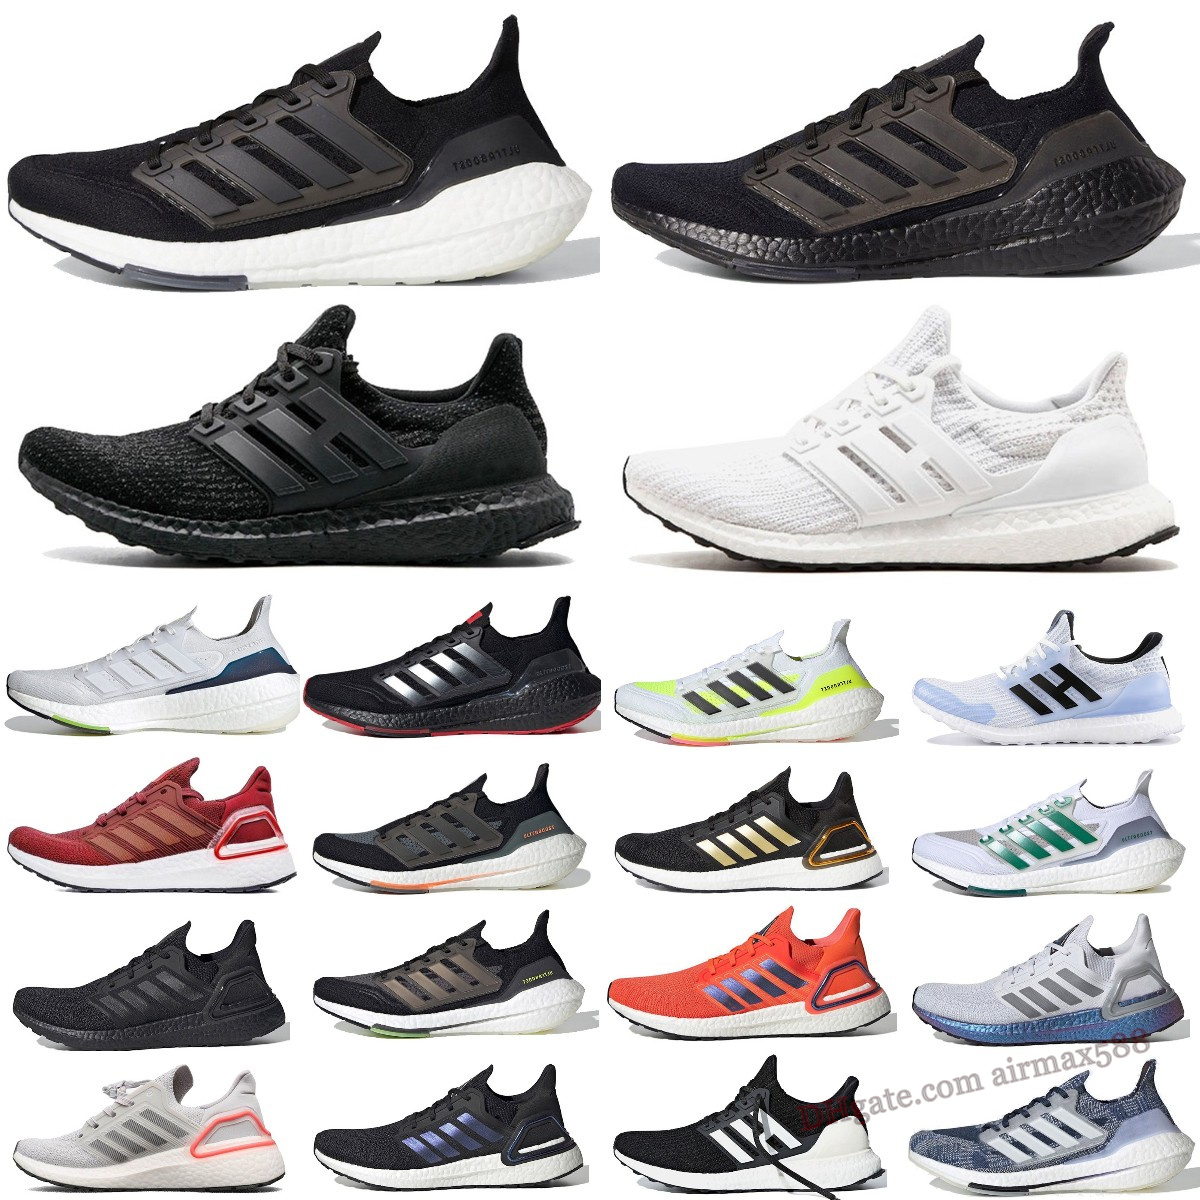 Ultra Boost Arrival Authentic Men Trainers Running Shoes UB Women Sports National Lab Dark Triple Black White Solar Yellow Grey Jogging Ultra Sneakers outdoor